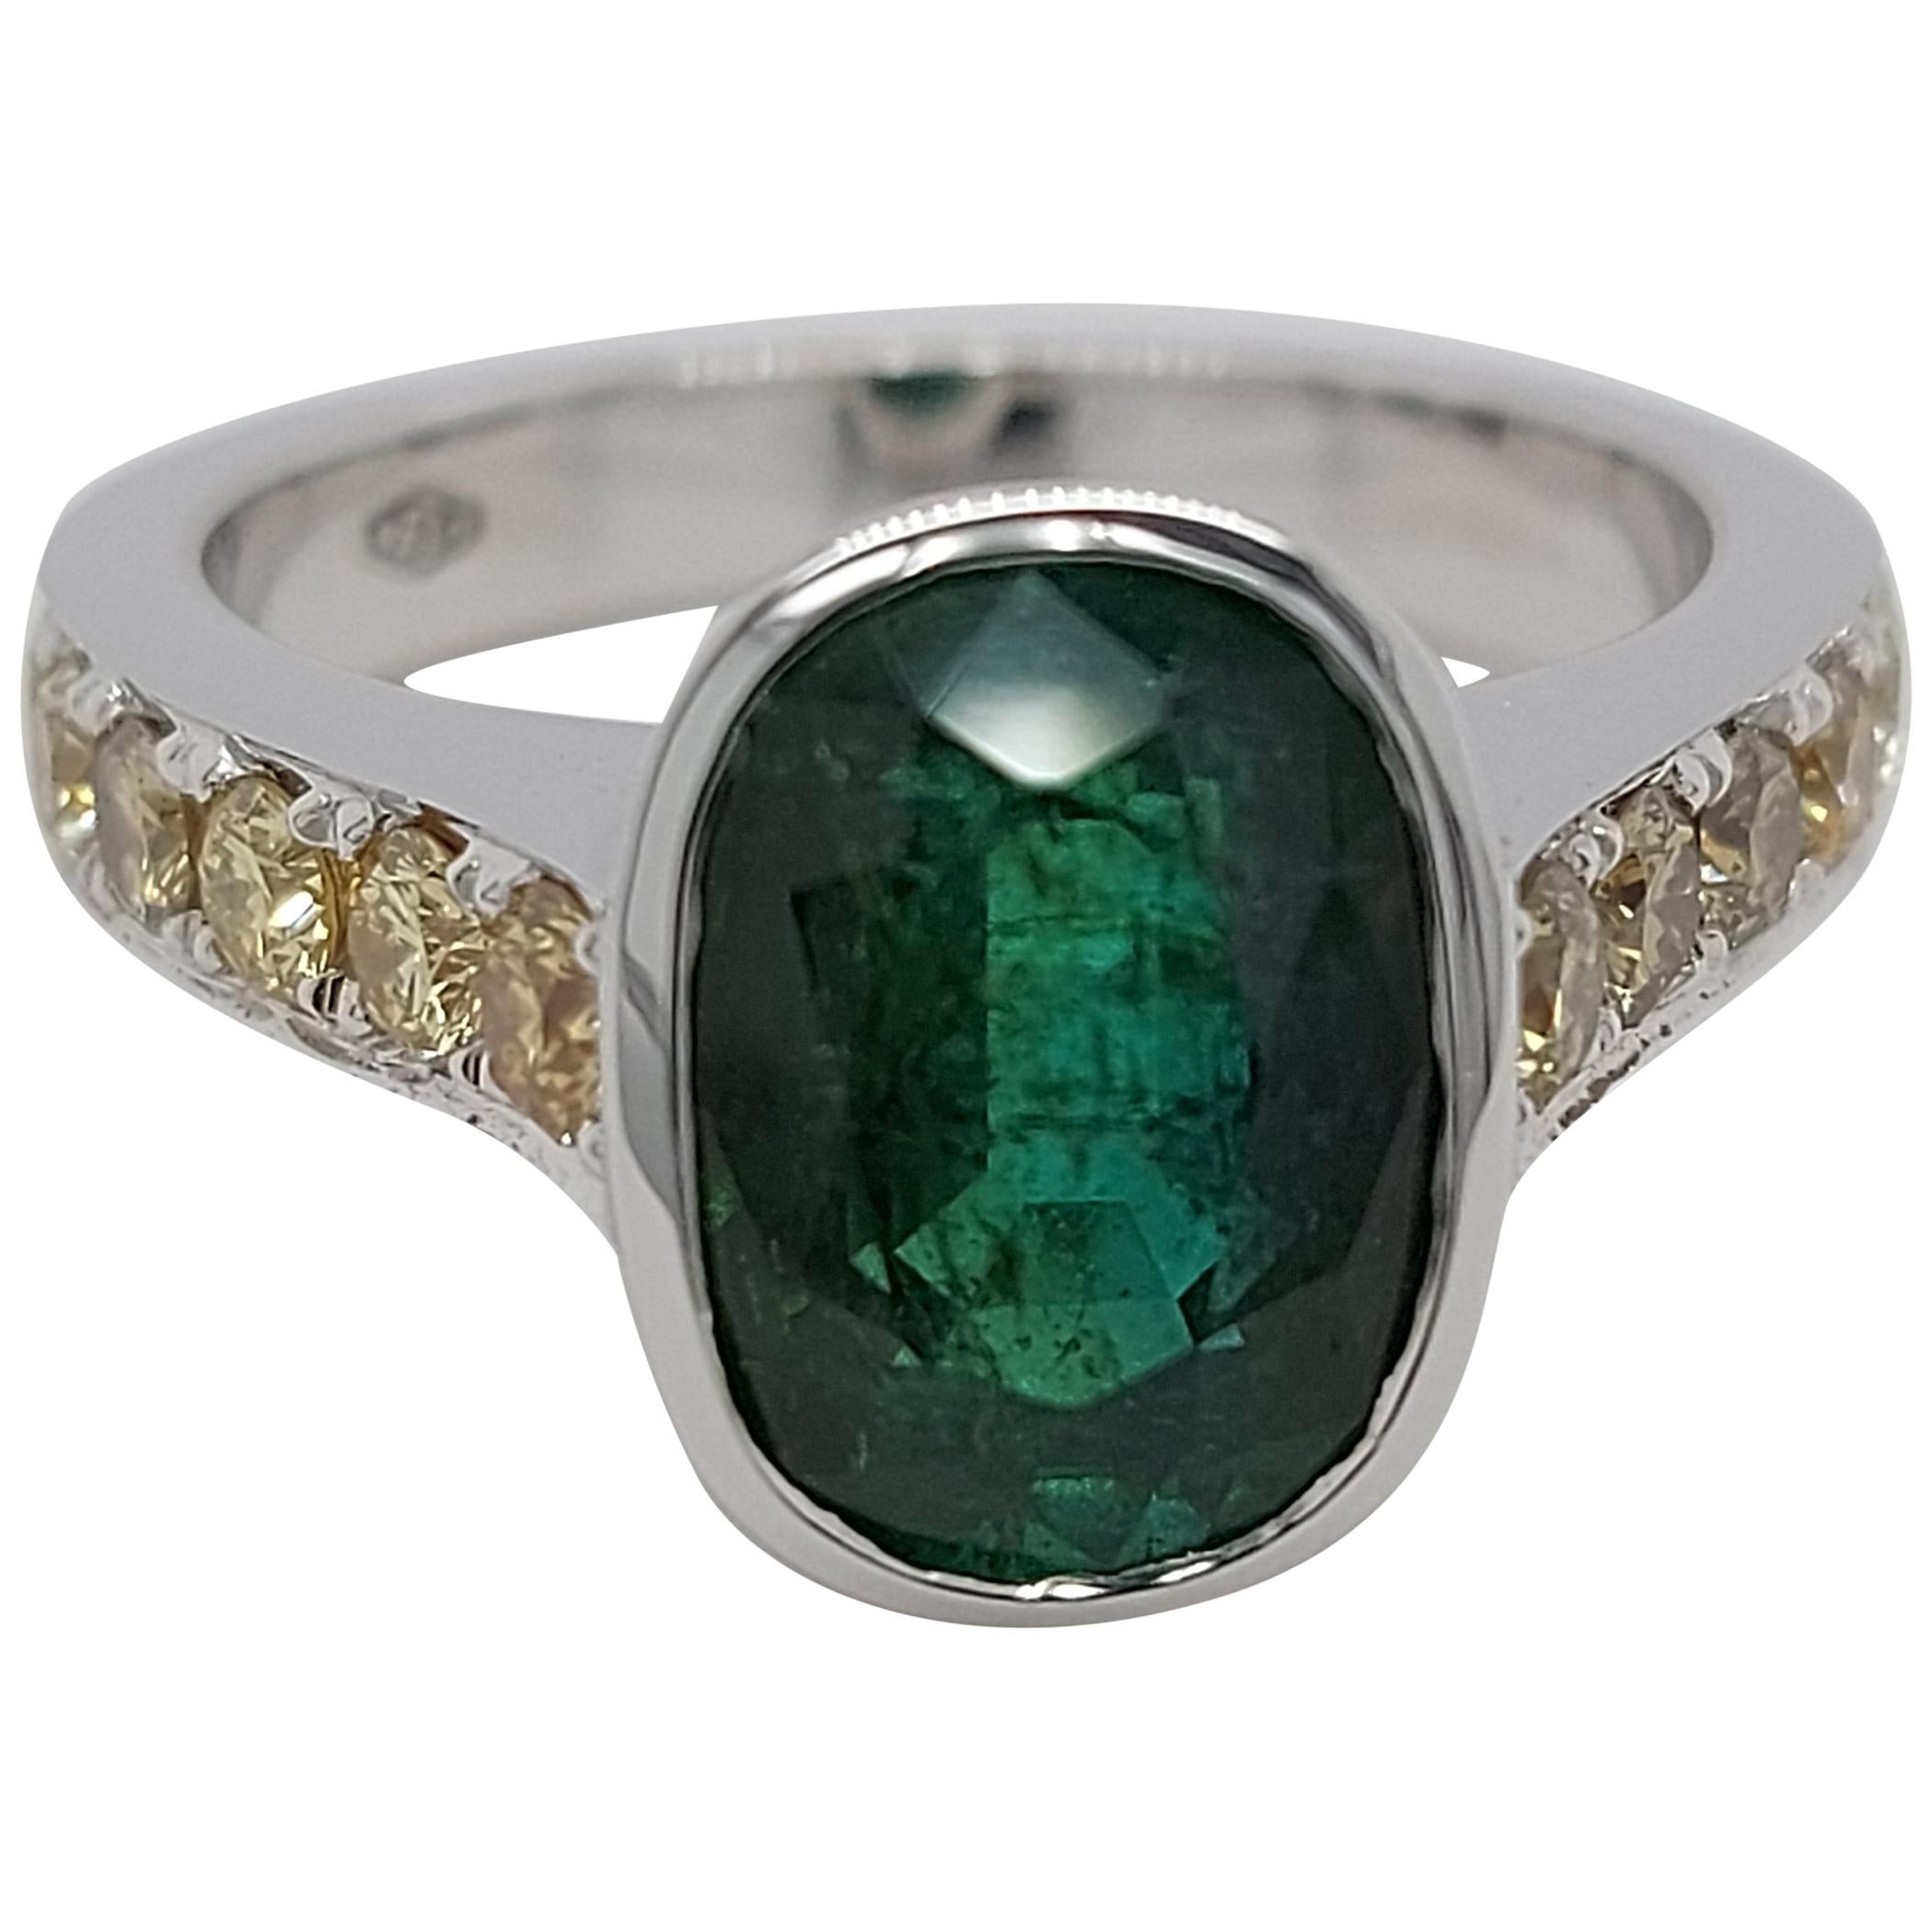 18 Karat White Gold Ring with 3.15 Carat Emerald and Fancy Yellow Diamonds